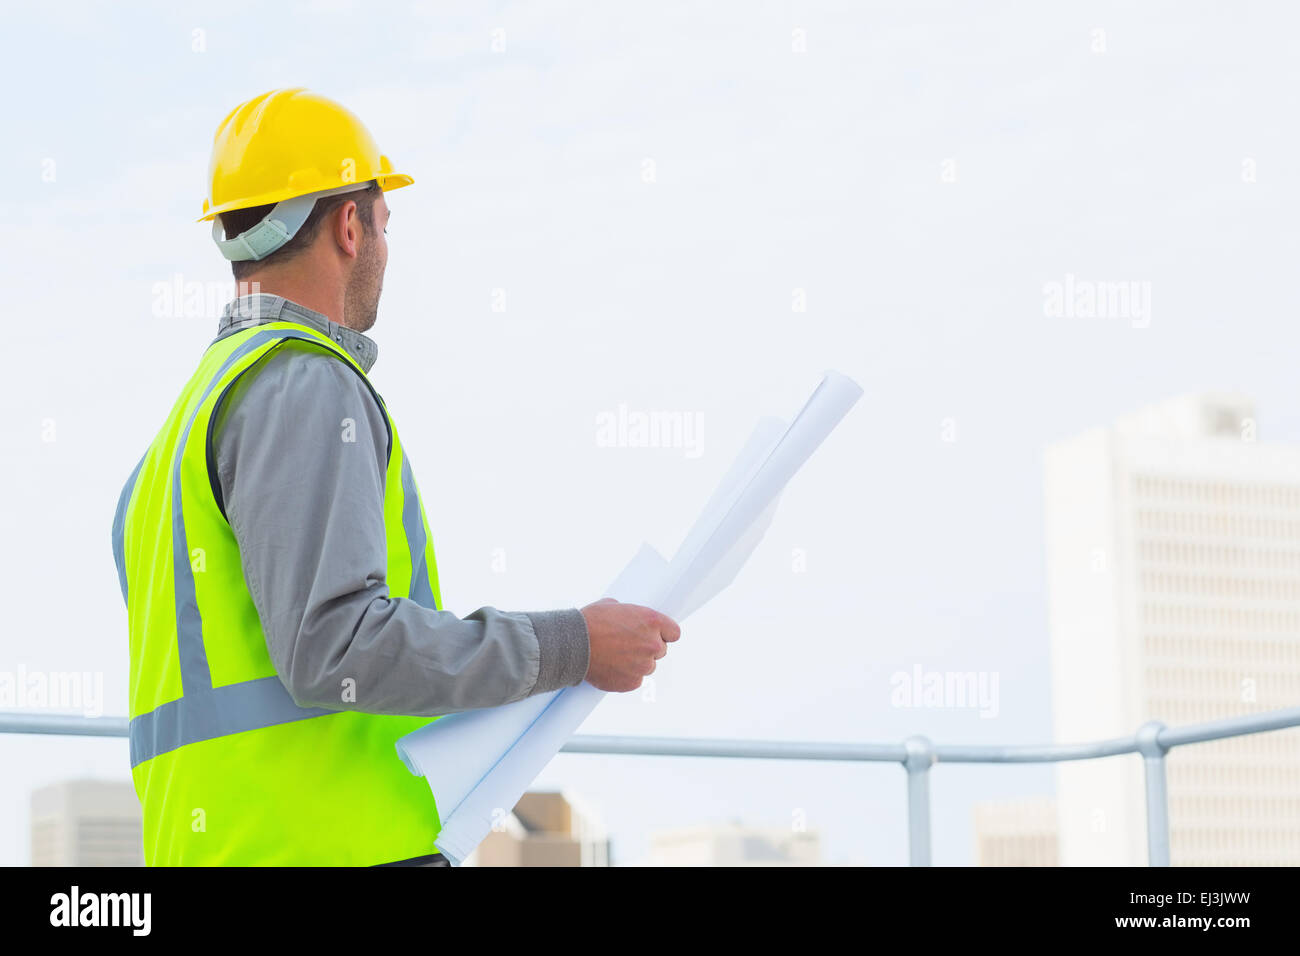 Architect in protective workwear holding blueprints outdoors Stock Photo